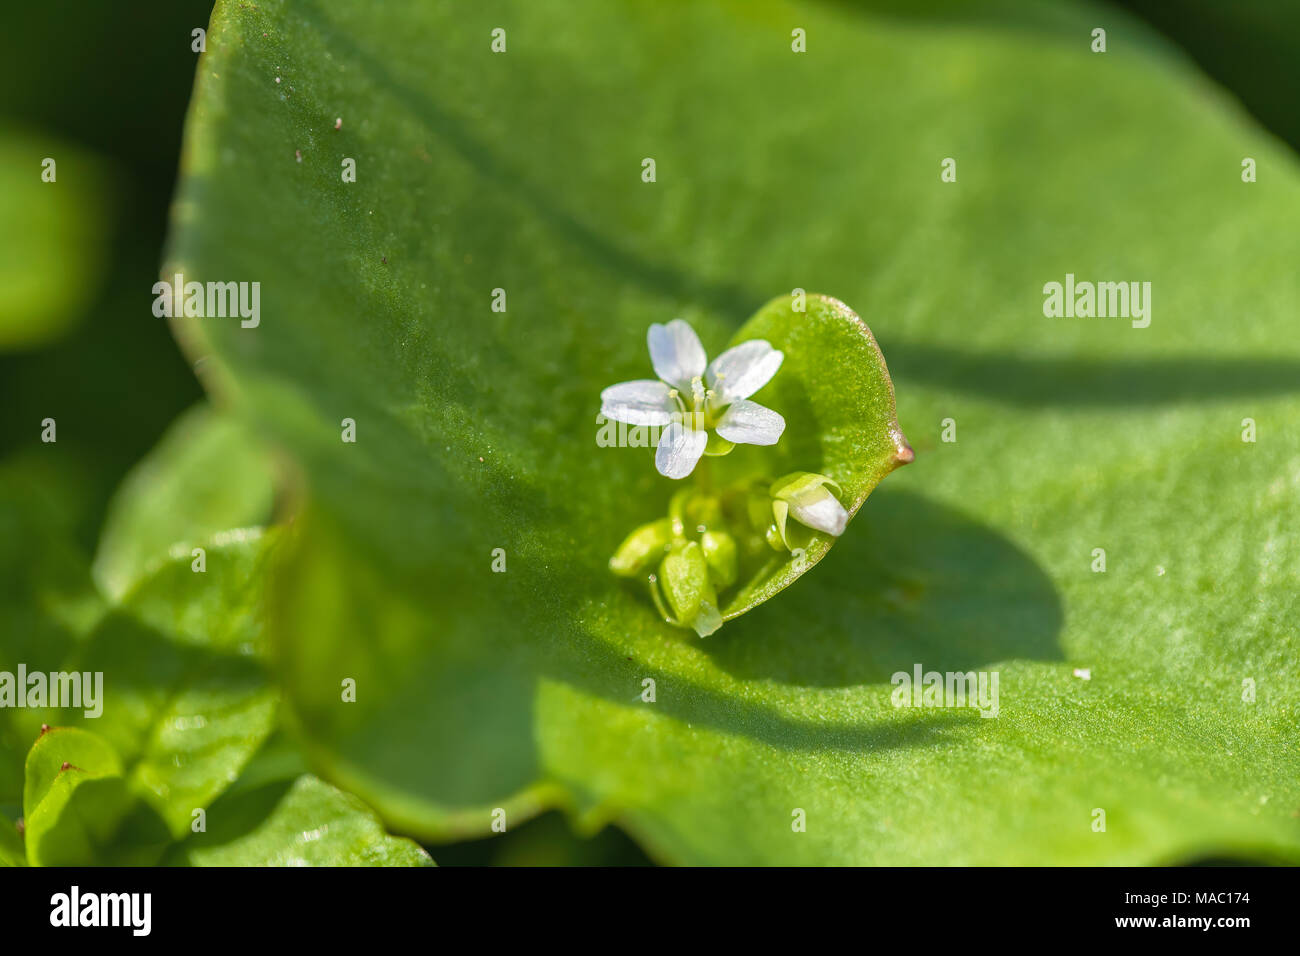 Miner's lettuce (Claytonia perfoliata) flowers bloom in early spring in Point Lobos State Natural Reserve, California, United States. Stock Photo